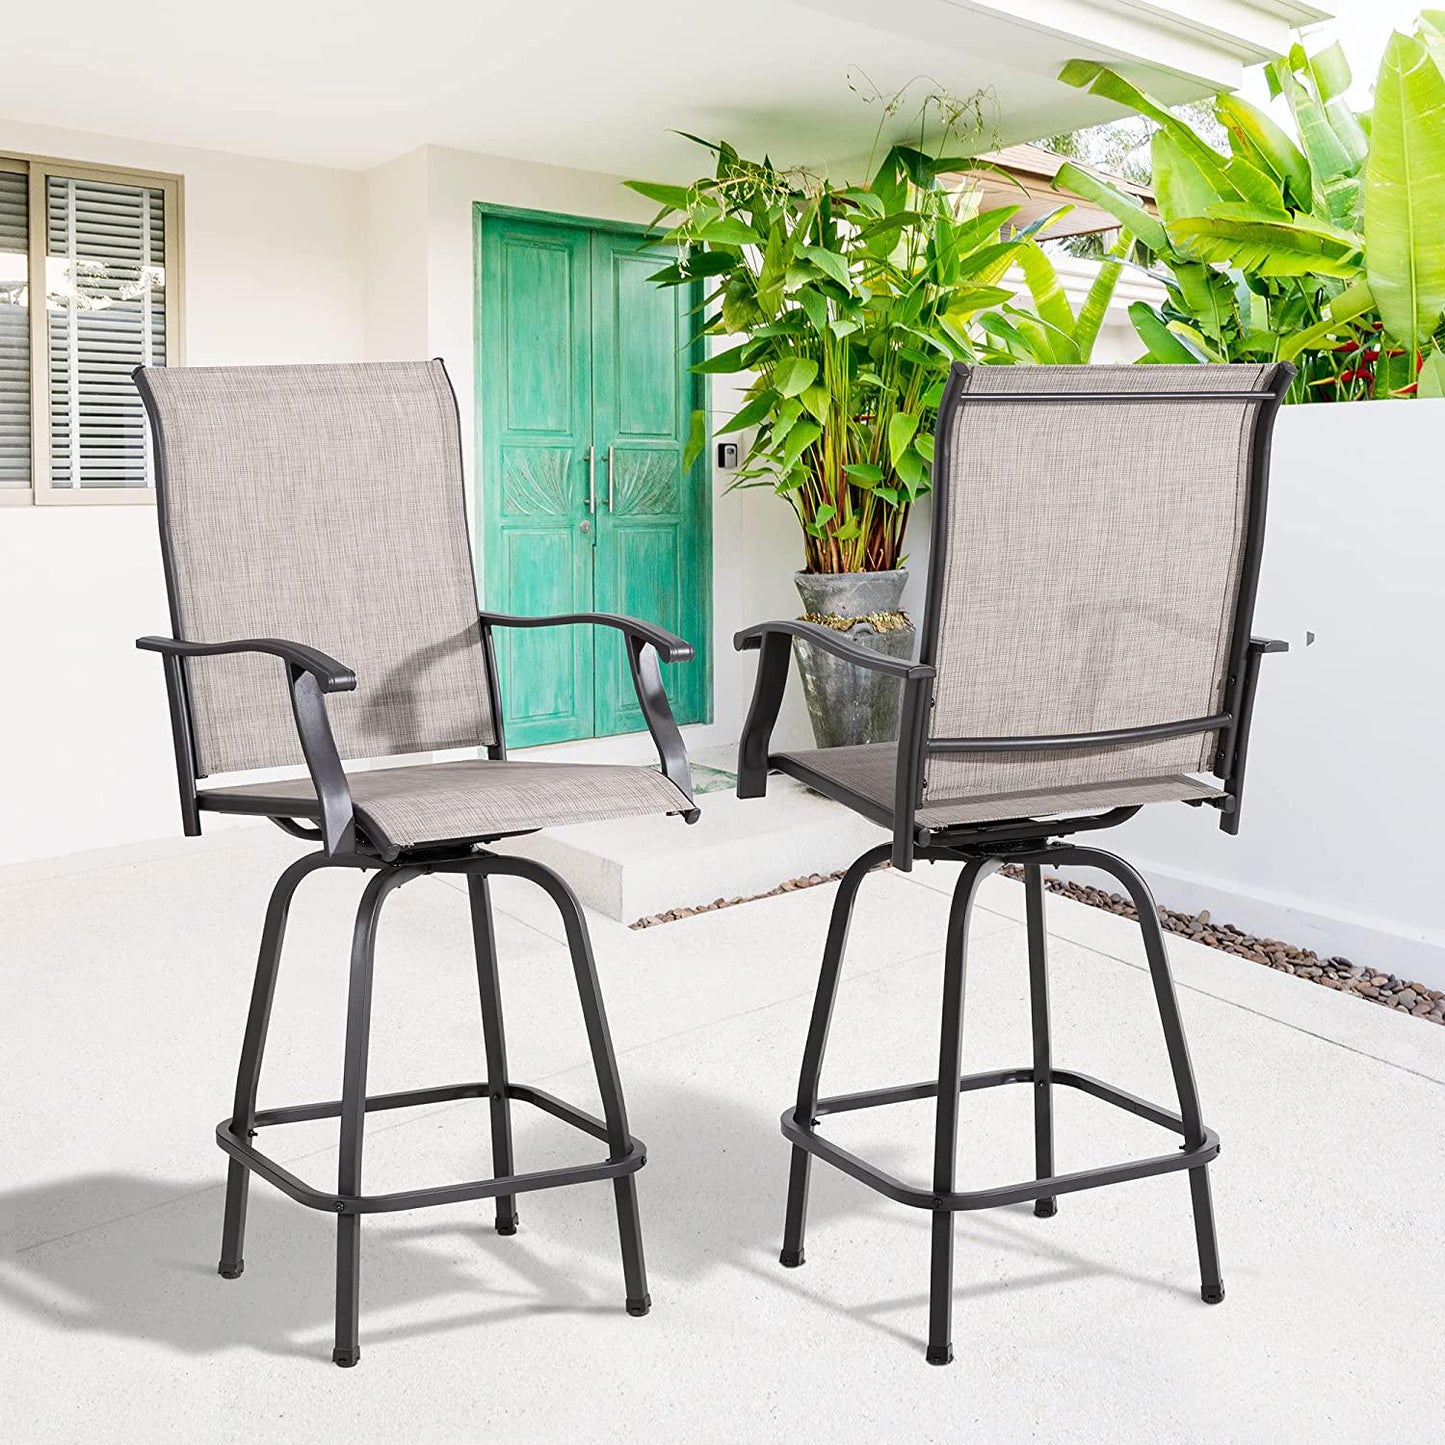 Vongrasig 2 Piece Patio Swivel Bar Chairs, All Weather Metal Textile High Swivel Bar Stools Chairs, Outdoor High Top Bistro Set for Backyard, Lawn Garden, Balcony, Taupe